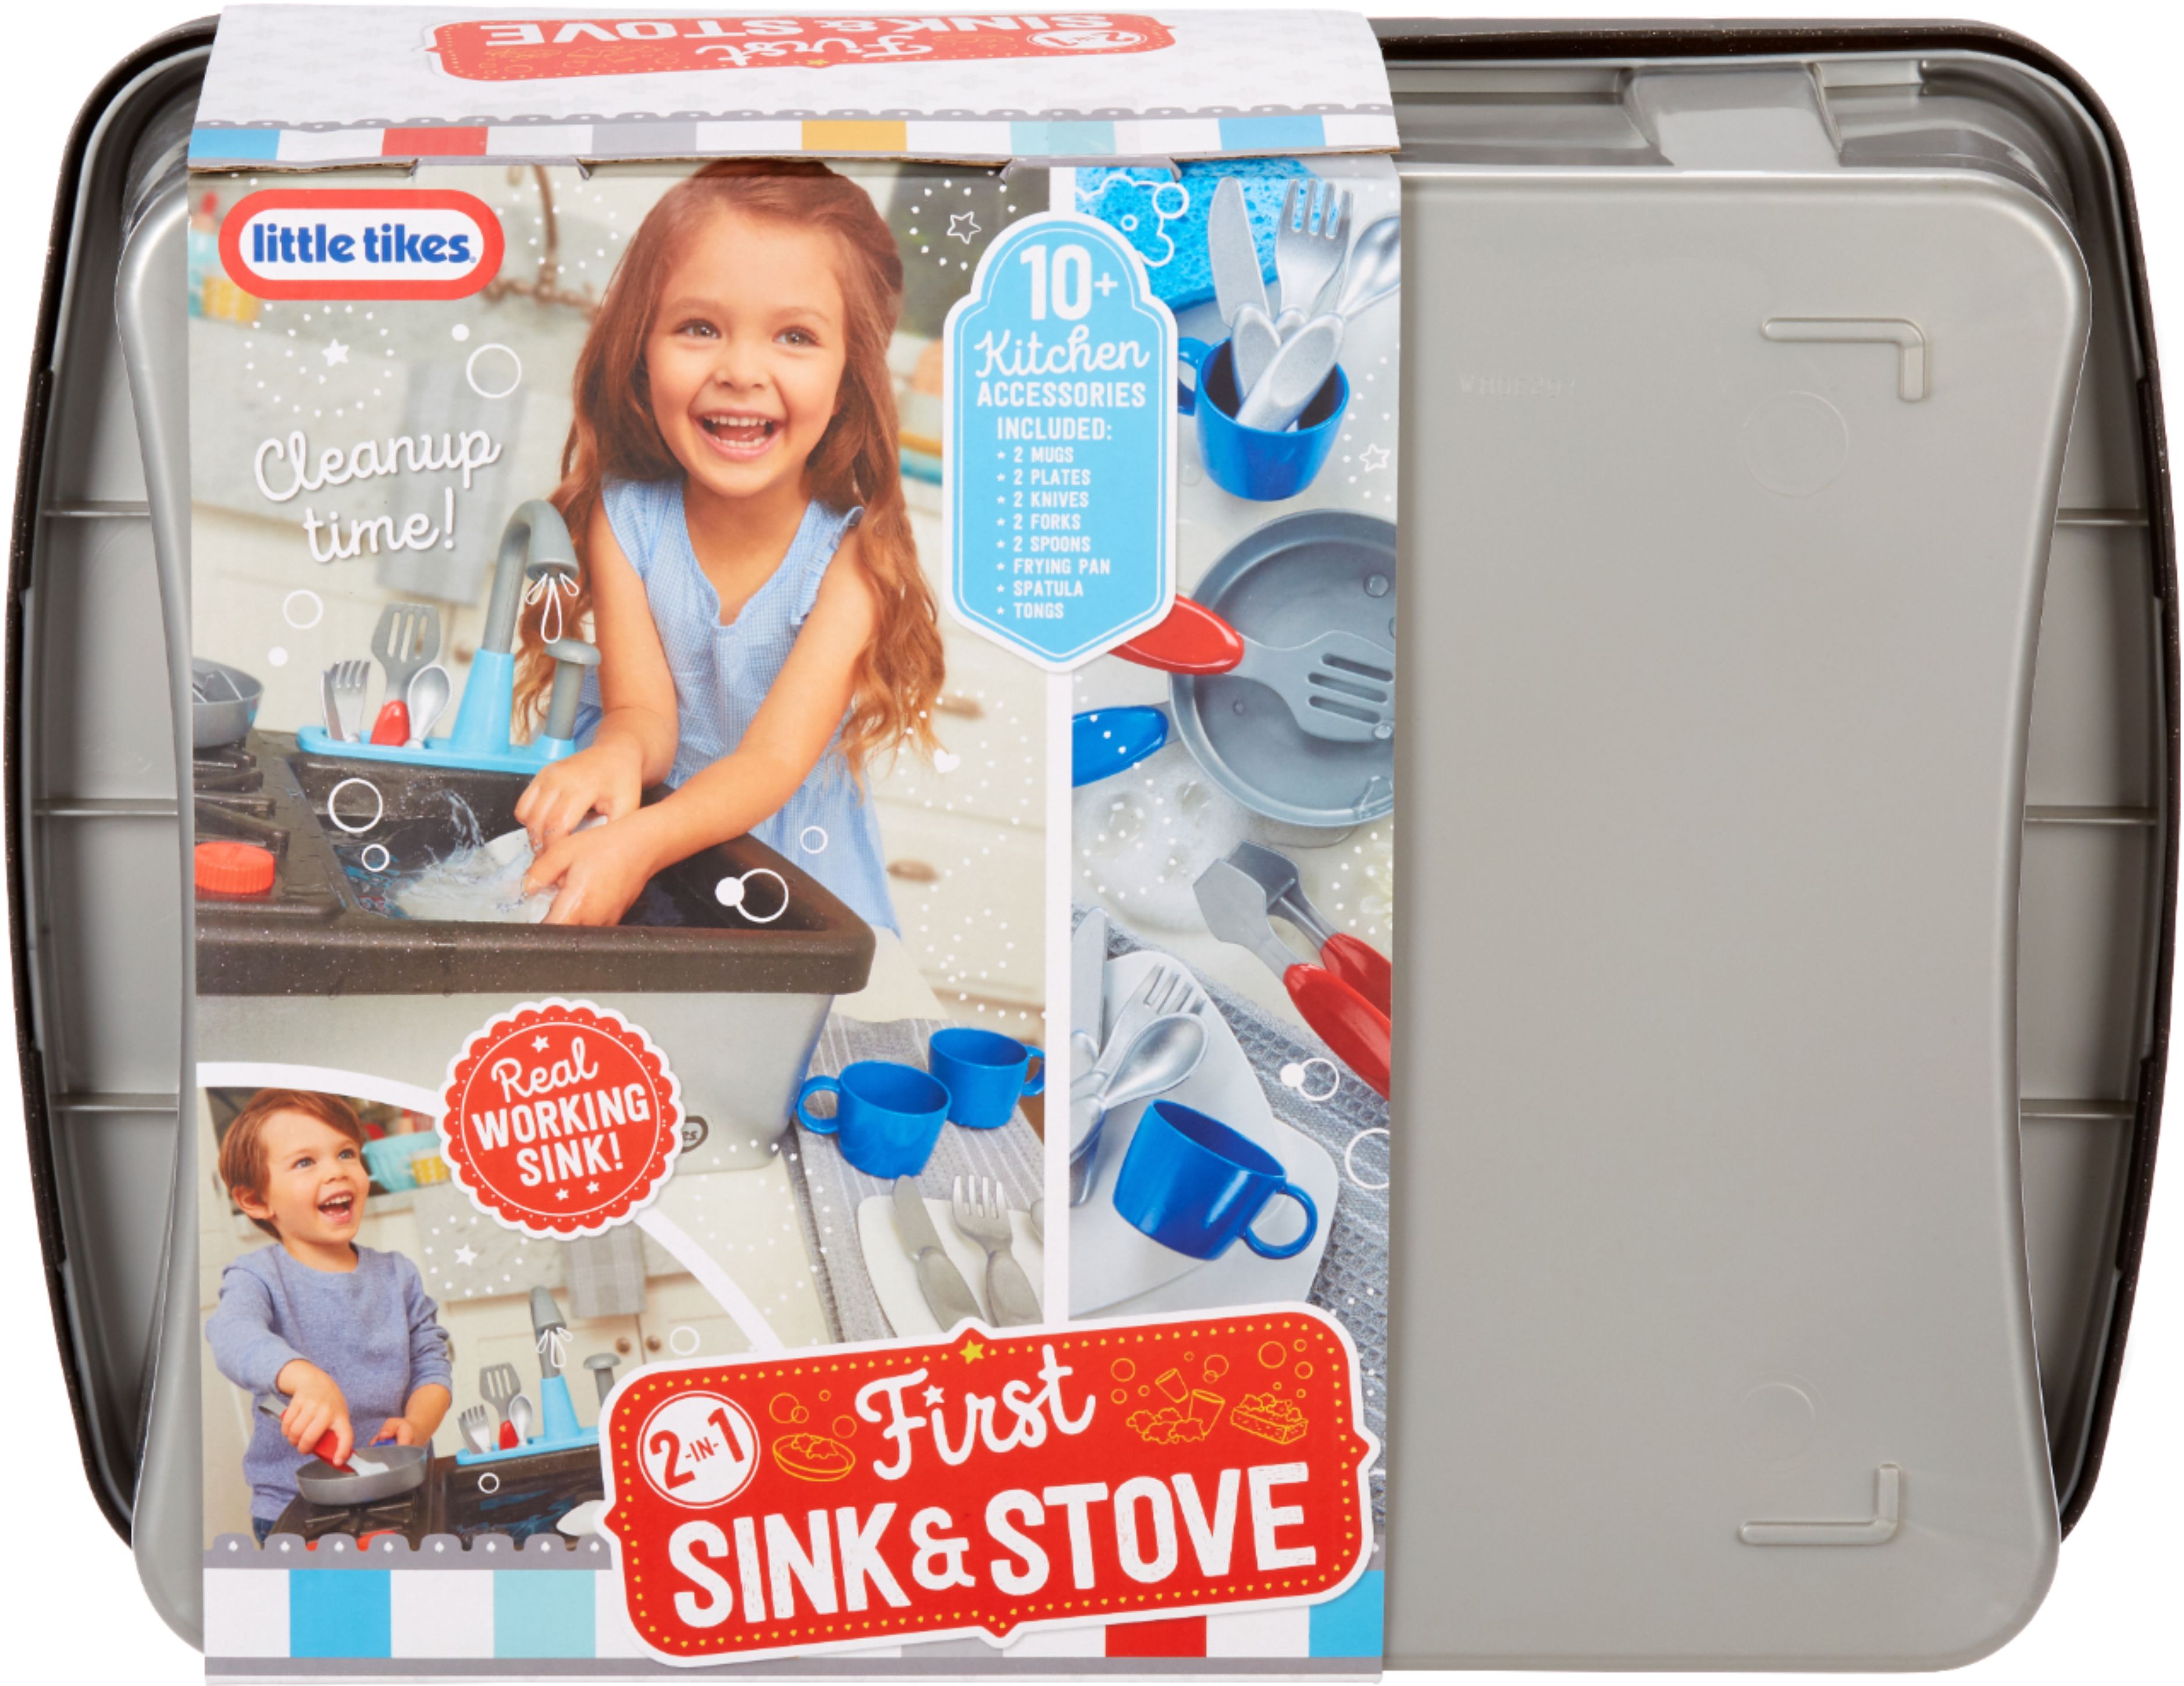 Best Buy: Little Tikes First Oven Realistic Pretend Play Appliance for Kids  651403